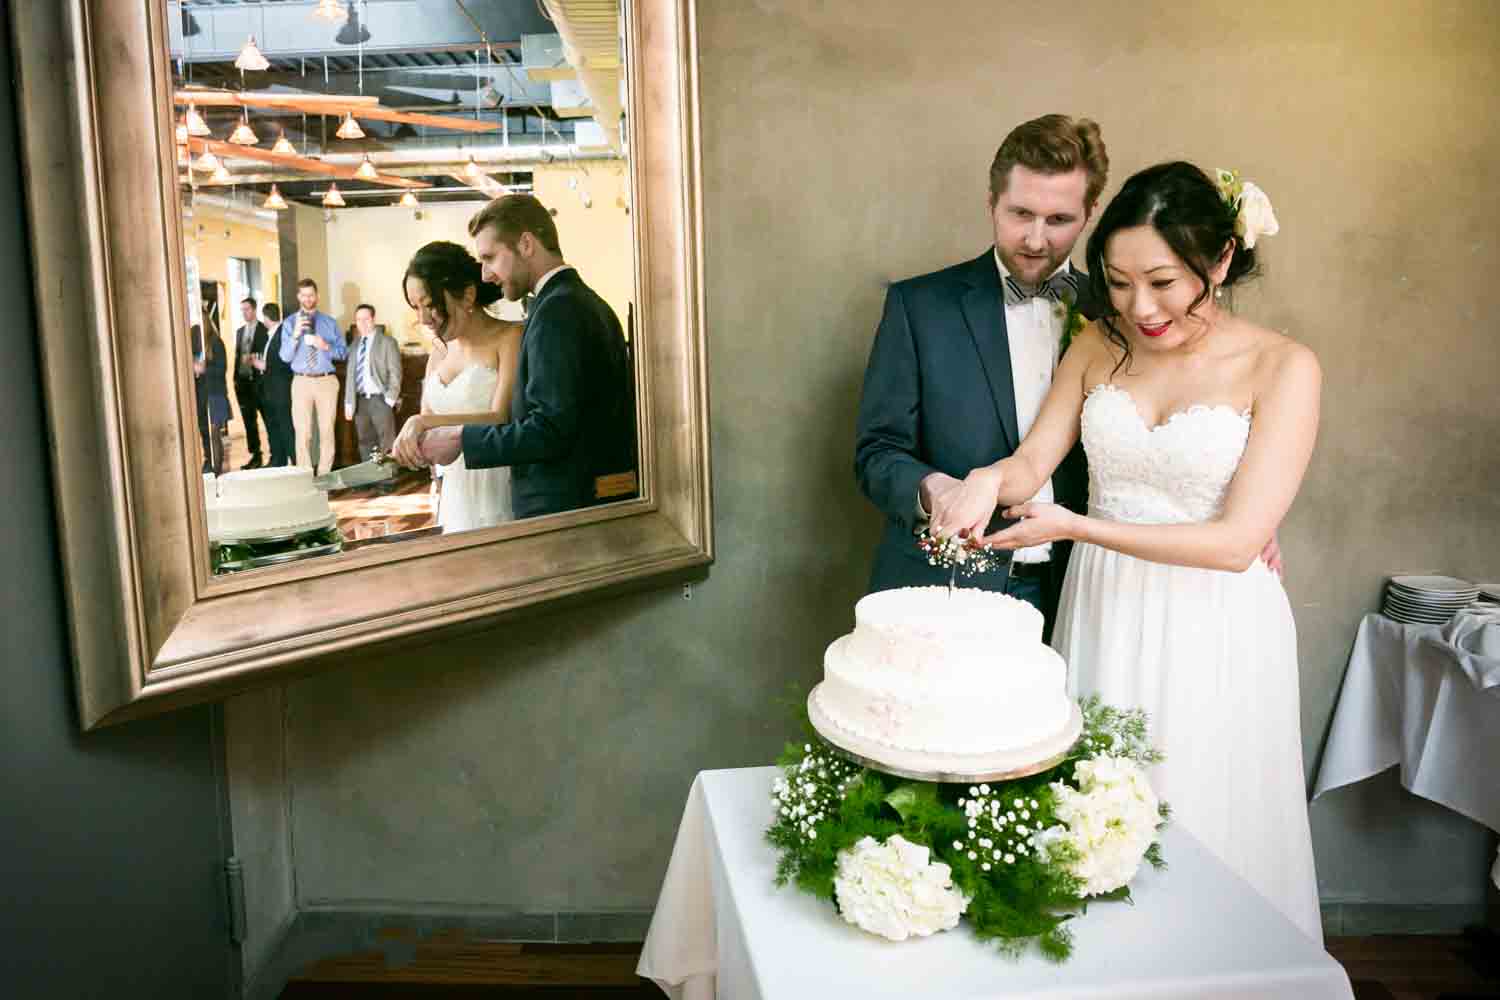 Bride and groom cutting cake with reflection in mirror